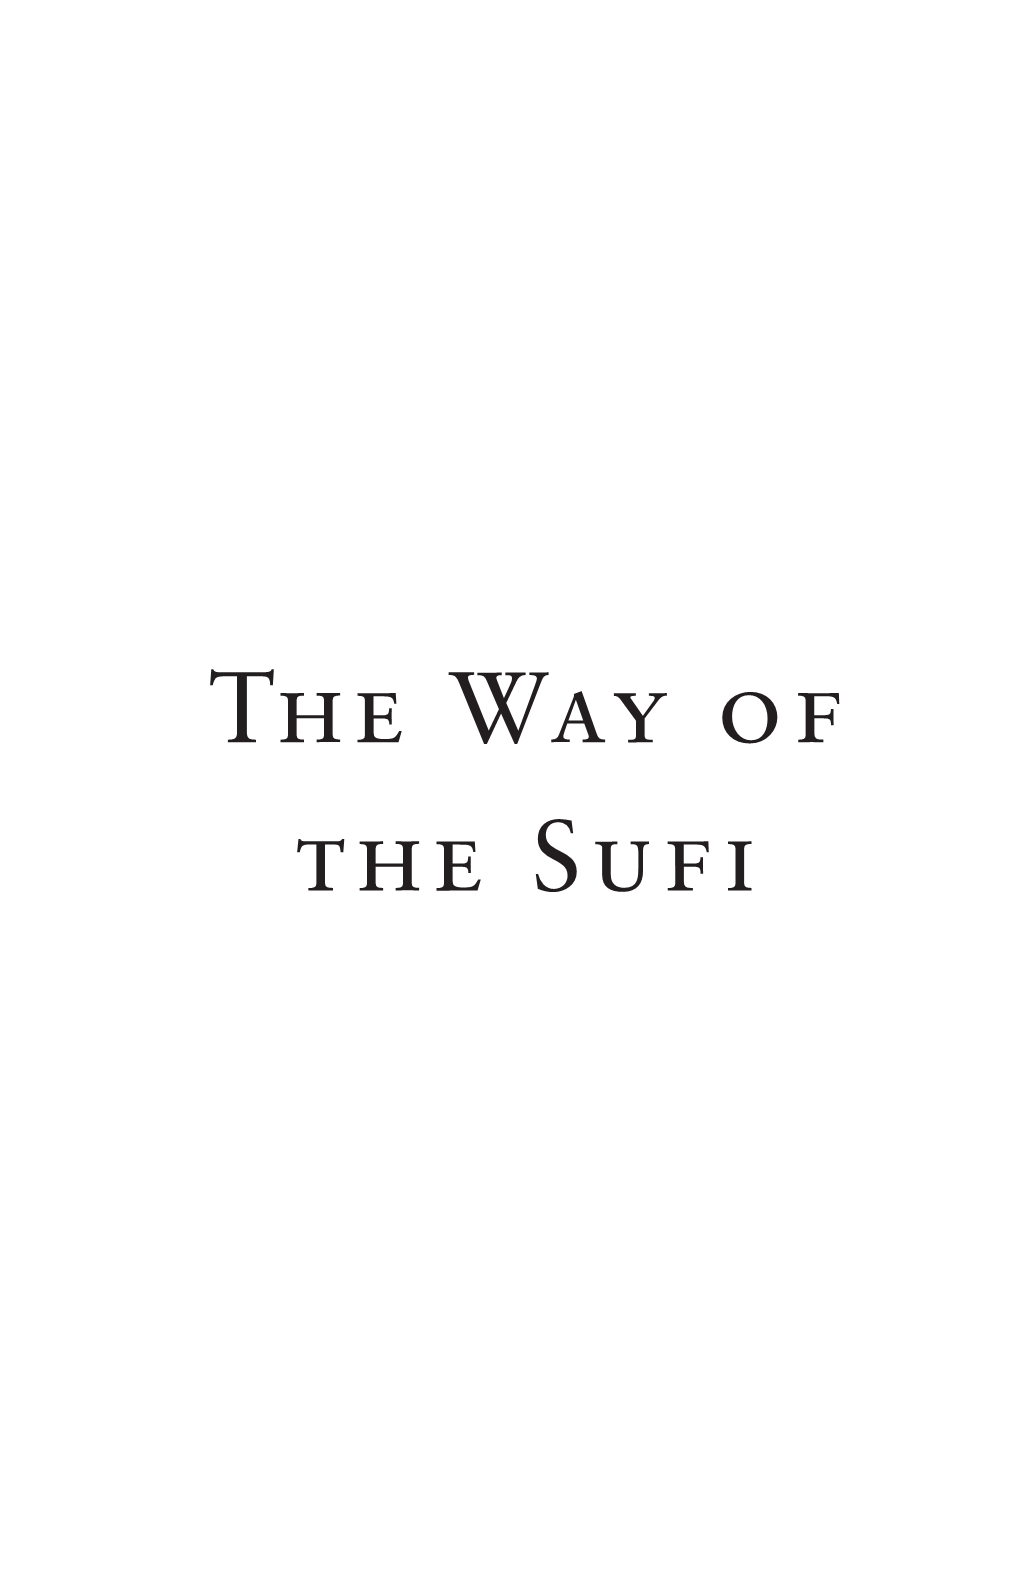 The Way of the Sufi Books by Idries Shah